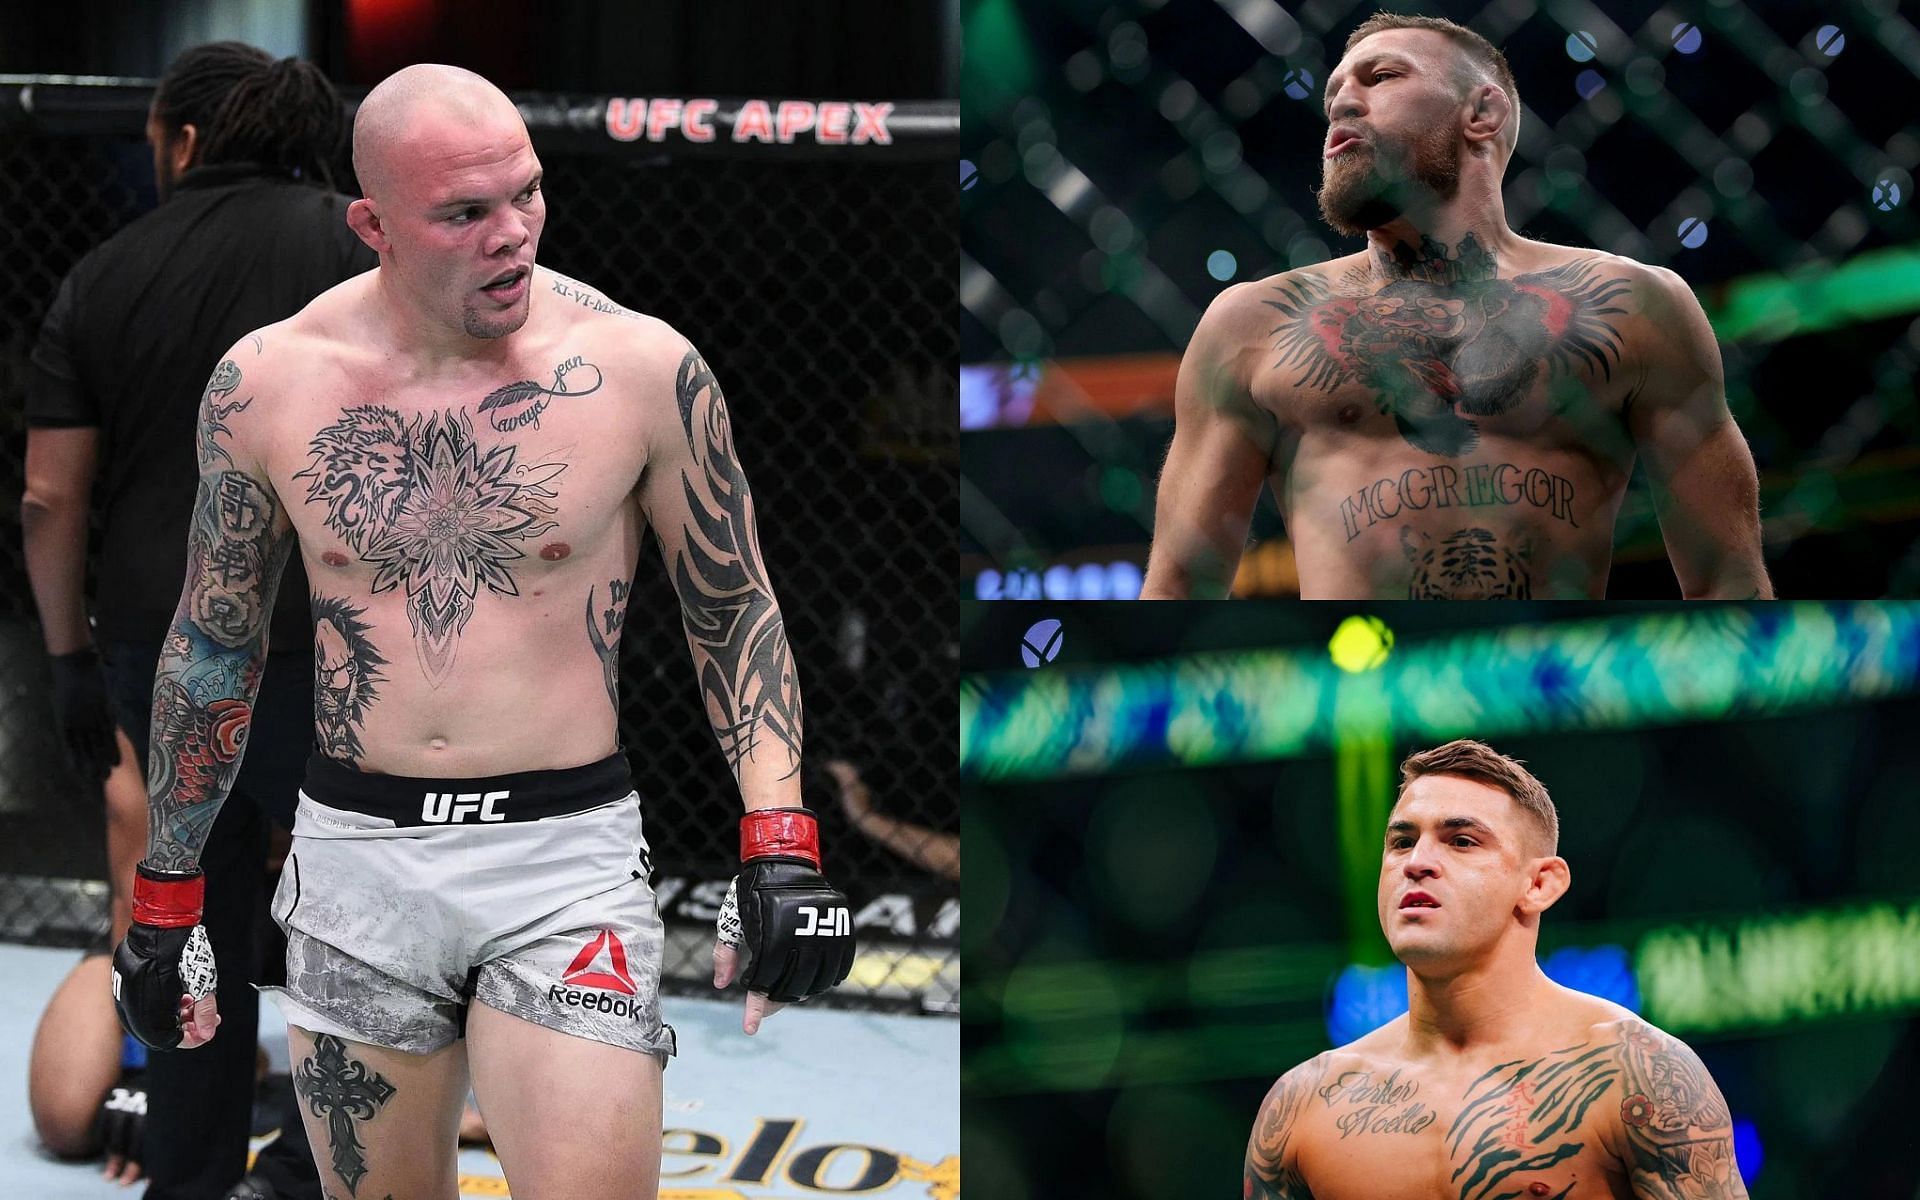 Anthony Smith (left), Conor McGregor (top right), and Dustin Poirier (bottom right) [Images courtesy of Getty]